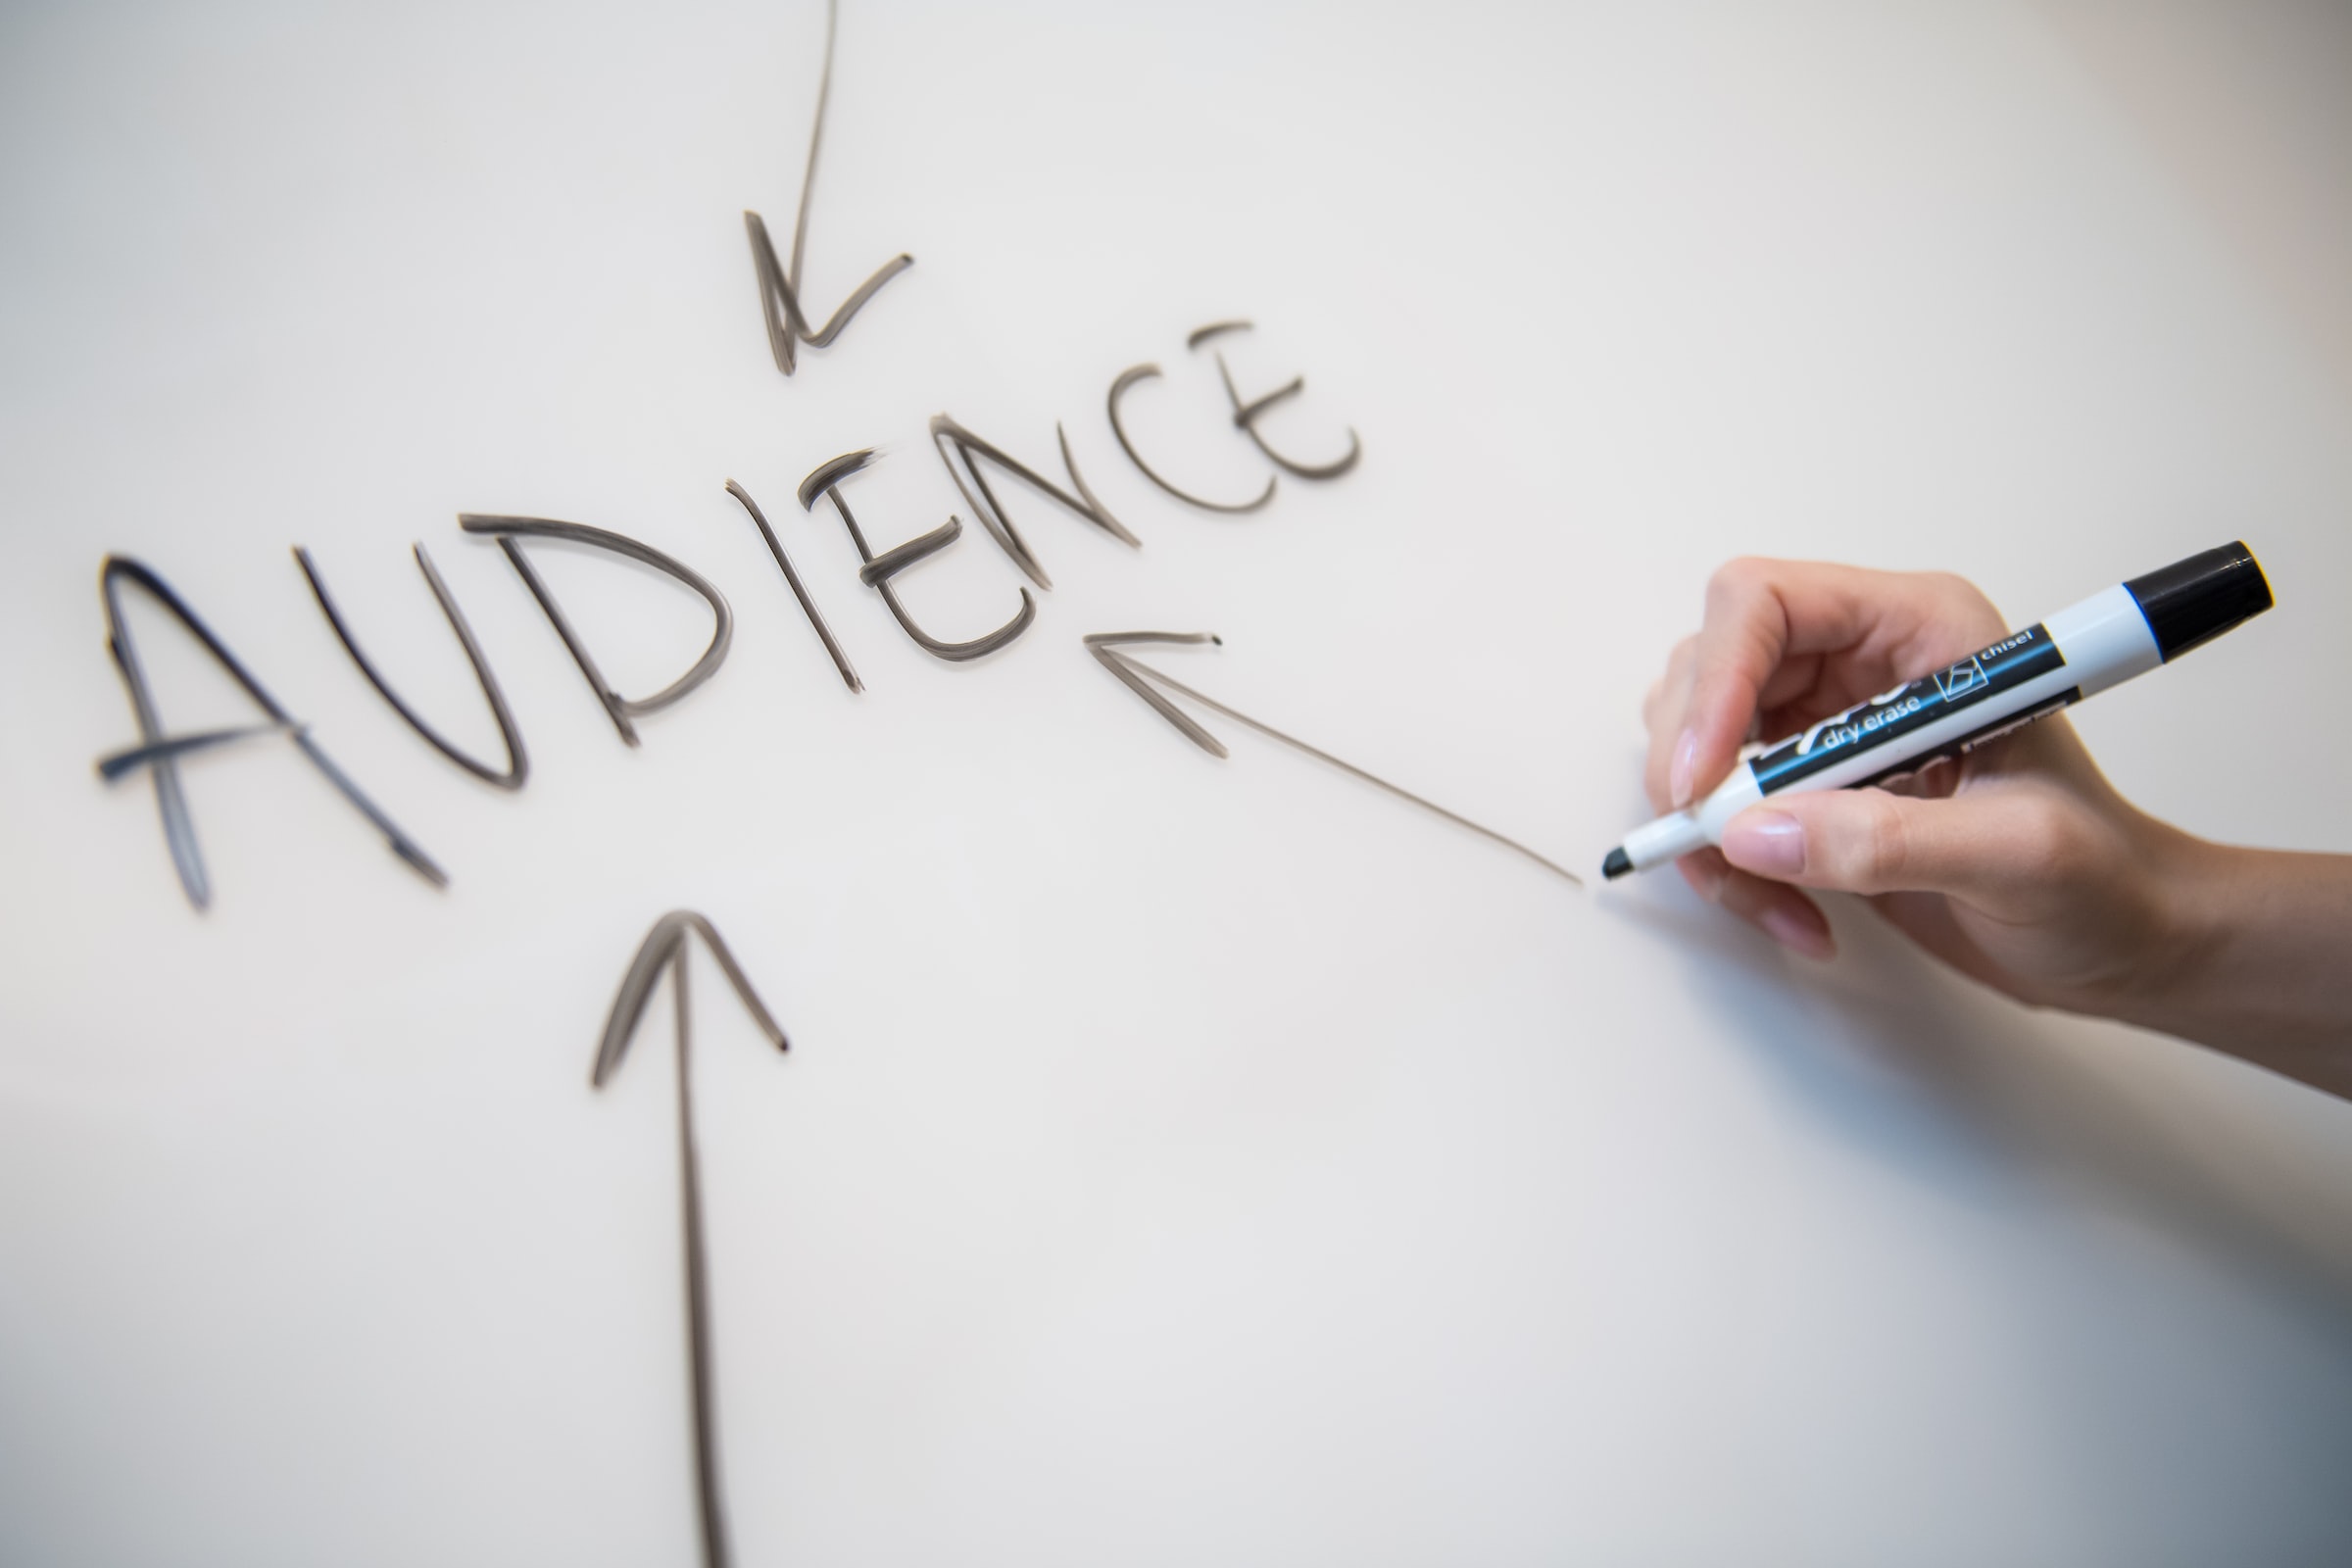 a hand holding a marker with 'audience' writing and three arrows on a white board stock image